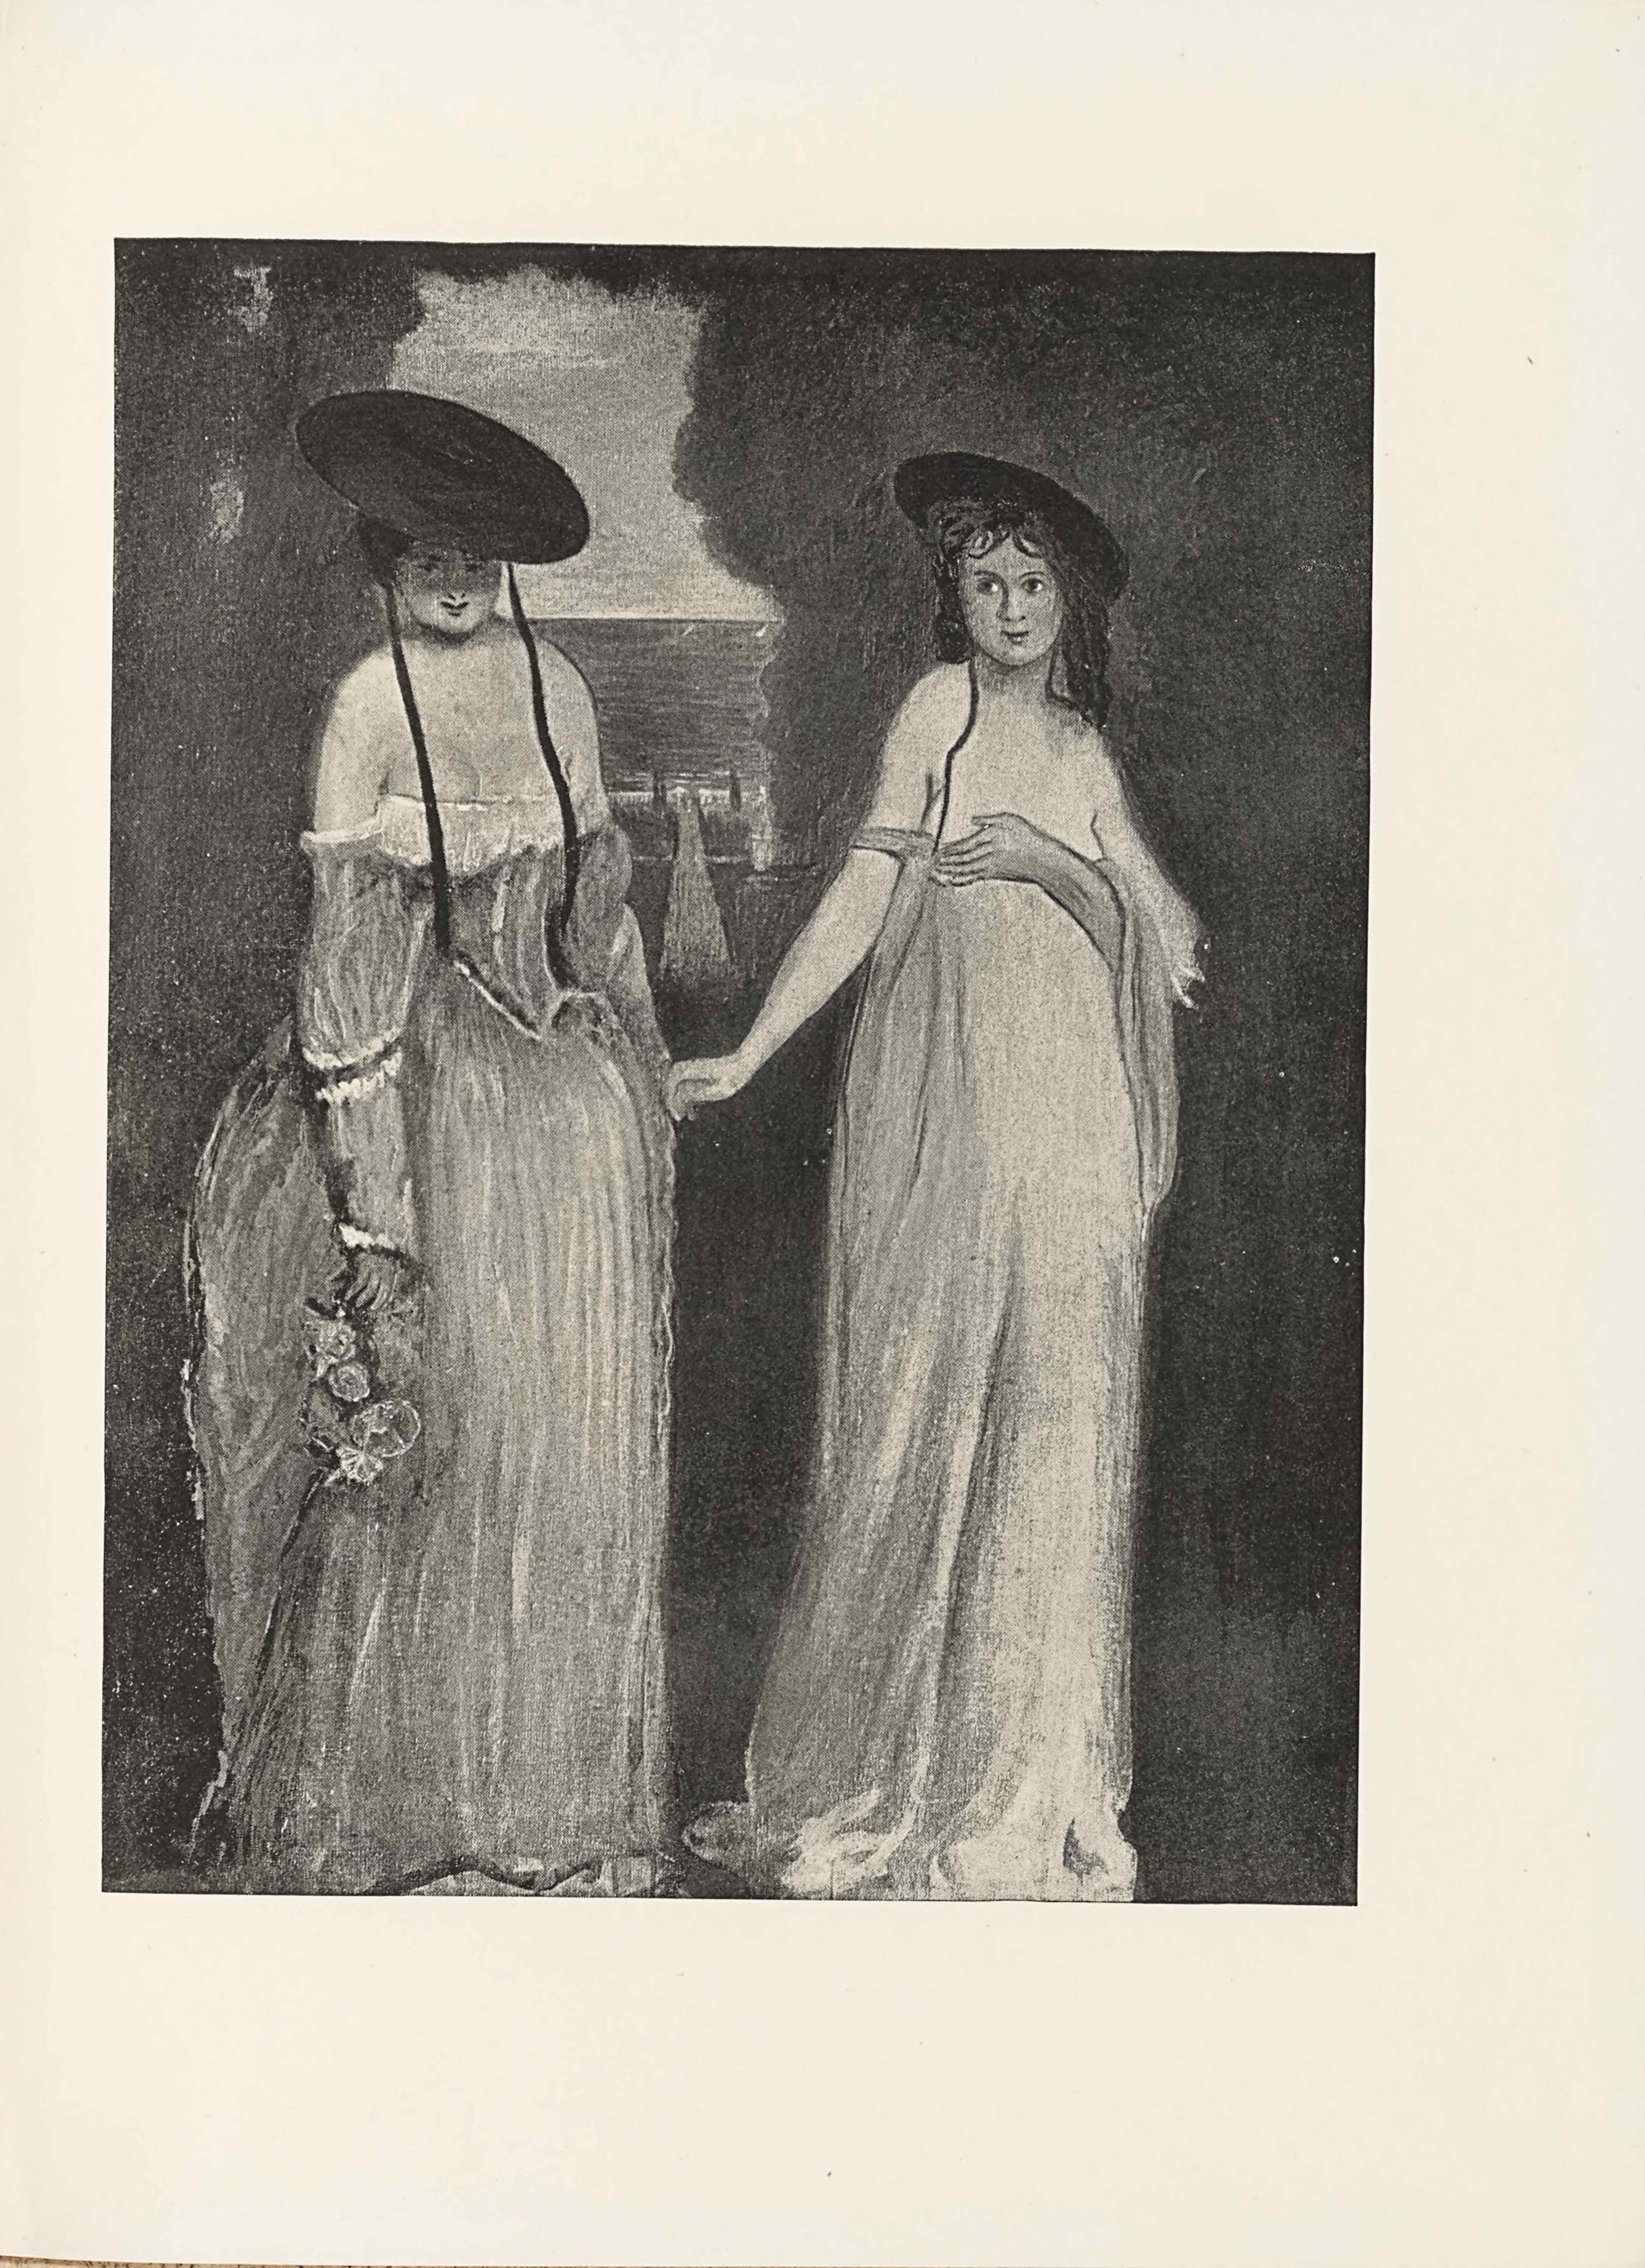 The halftone image is in portrait orientation. The image shows two young women or girls standing in an outdoor scene, taking up almost the whole height of the picture plane. The woman on the left side is standing turned slightly to the right. She is wearing a long gown that has a very low cut and off-the-shoulder style neckline. The dress flows out at the waist into a mid-size skirt. The top of the dress is a corset. The shoulderless sleeves fall down to her wrist and have a single horizontal stripe of ruffles. In her right hand is a bouquet of flowers hanging upside down. Her chest is bare, apart from the two ribbons hanging down from a wide brimmed hat she wears slanted down and casting a shadow over her face. Her hair is pulled back underneath the hat. She has slightly upturned lips. Her eyes stare straight ahead at the viewer. Her left arm is pulled behind her slightly. The other woman, who is on the right side, is standing turned slightly to the right side of the page as well. She is wearing a very loose dress, one that is low-cut and appears to fall below her breasts. There is one off-the-shoulder sleeve wrapped around her right arm, but none appears on her left arm. Her right hand is extended out to the side and seems to reach towards the other woman’s left hand. Her left arm is bent up at a ninety degree angle and is holding the dress at the front and covering her breasts. A bit of excess material is draped over top of this left arm and hangs down her front. She also has on a brimmed hat, a slightly smaller one than the other woman’s. The hat has two ribbons falling down from it and the right ribbon falls over her chest while the other is tucked behind her left shoulder. Her slightly wavy hair falls down behind her shoulders. In the middle of the two women and backgrounded is a sailboat. This boat floats in the water that extends out to the skyline in the background. There is only a small opening to see the boat and the water behind it though, for the rest of the background is filled with a dark hedge.